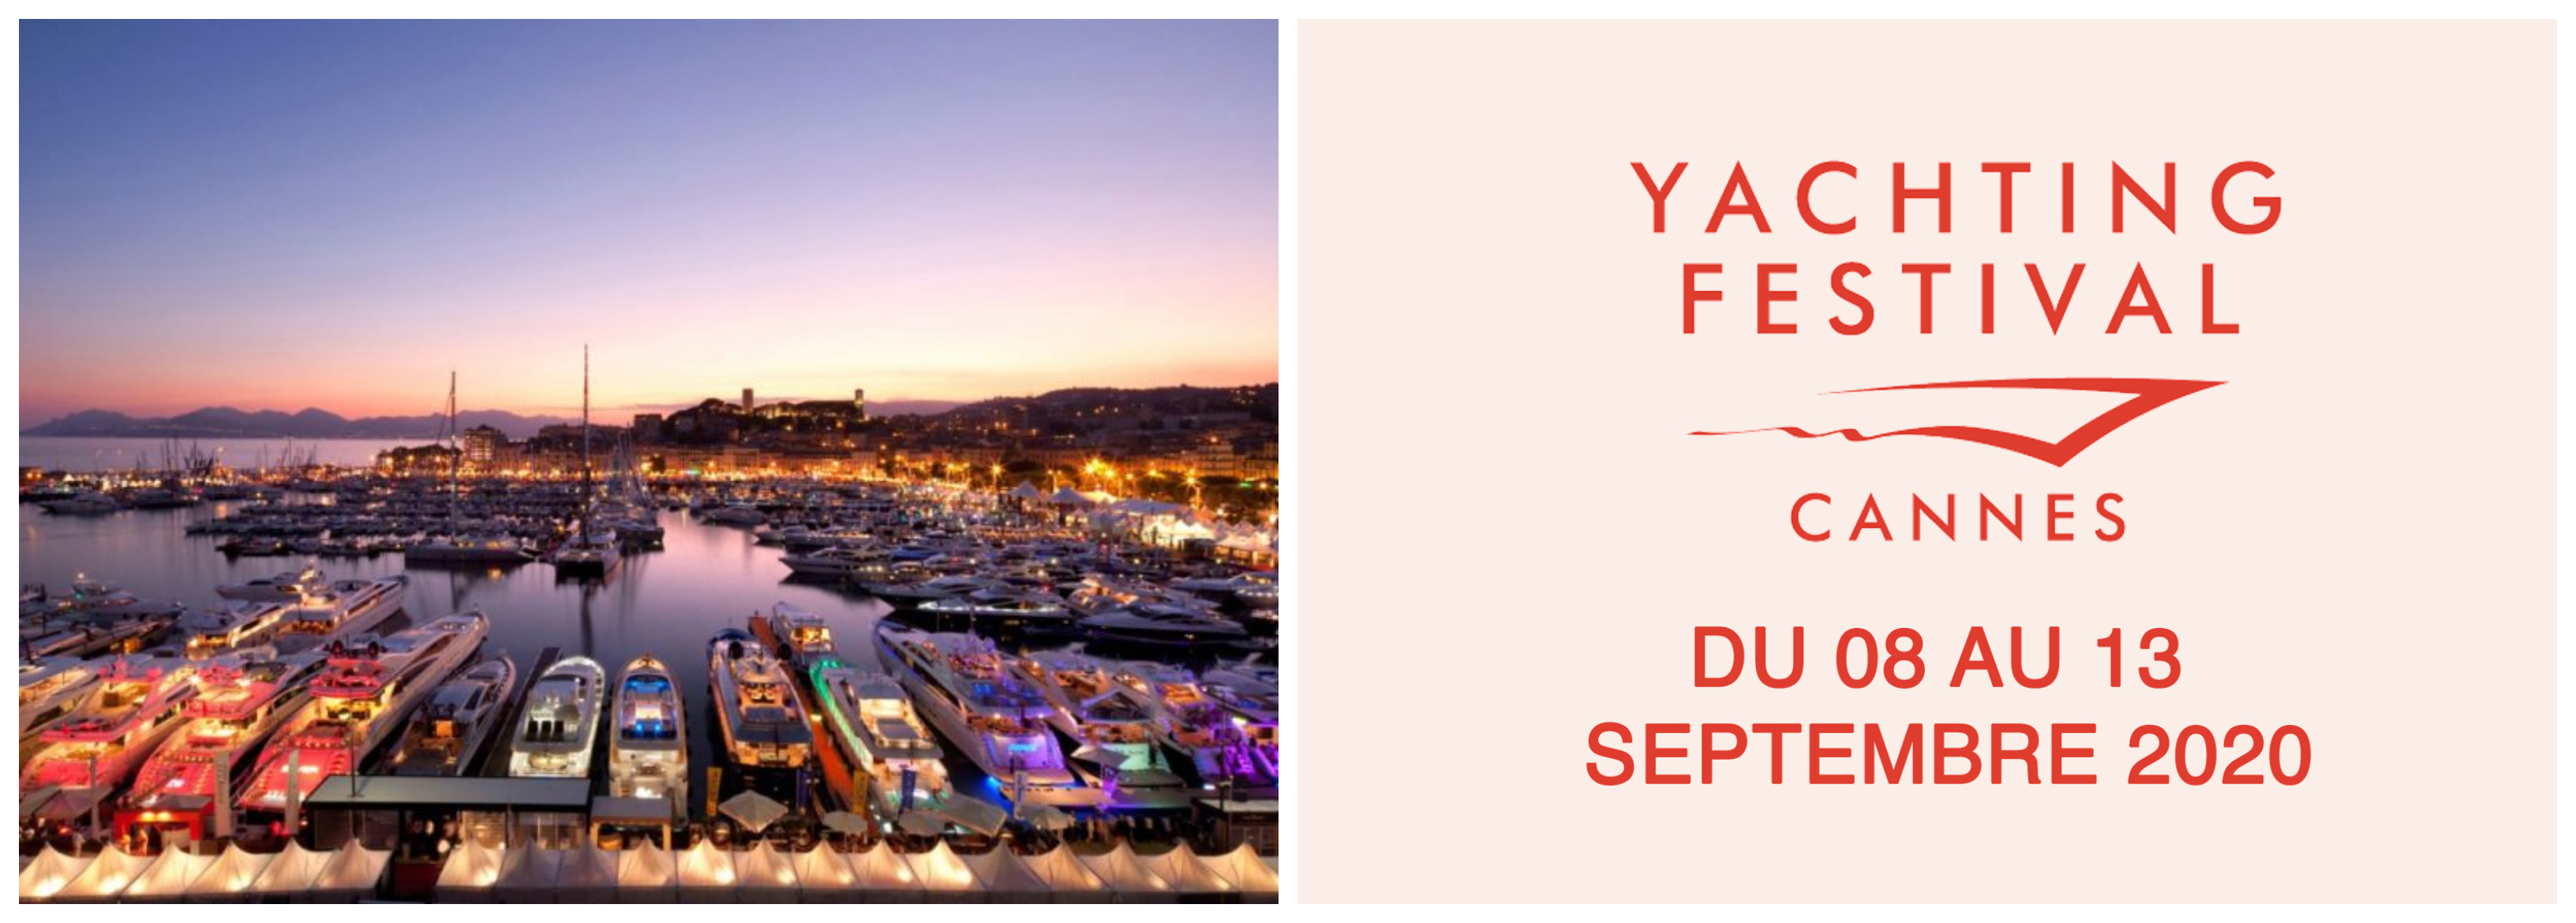 yachting-festival-cannes